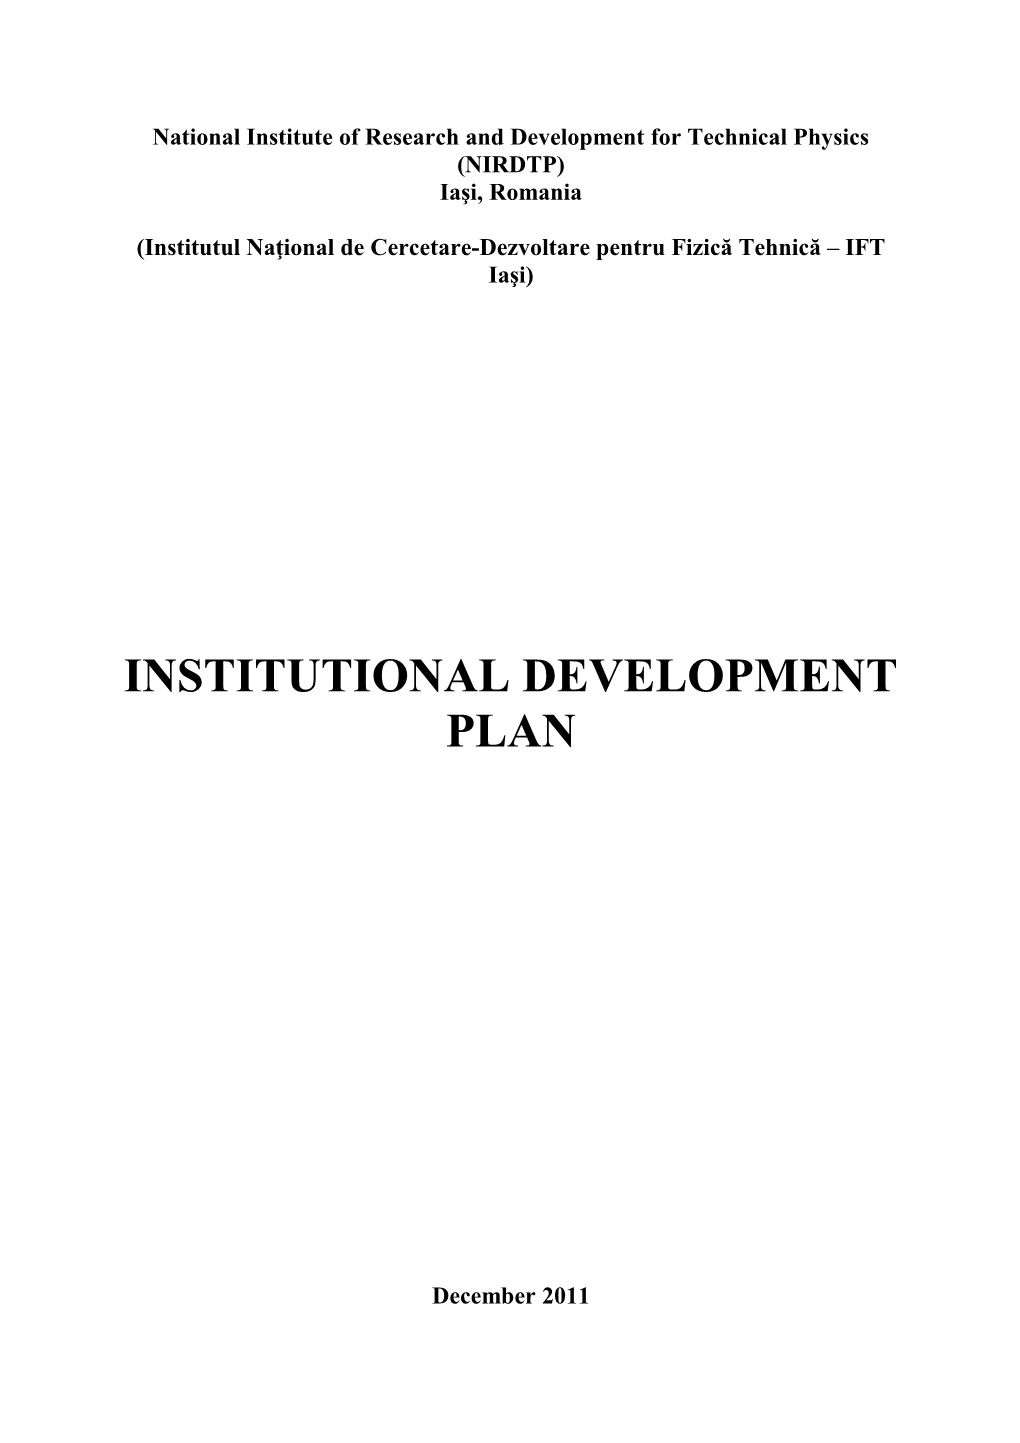 Self-Assessment Report and Institutional Development Plan